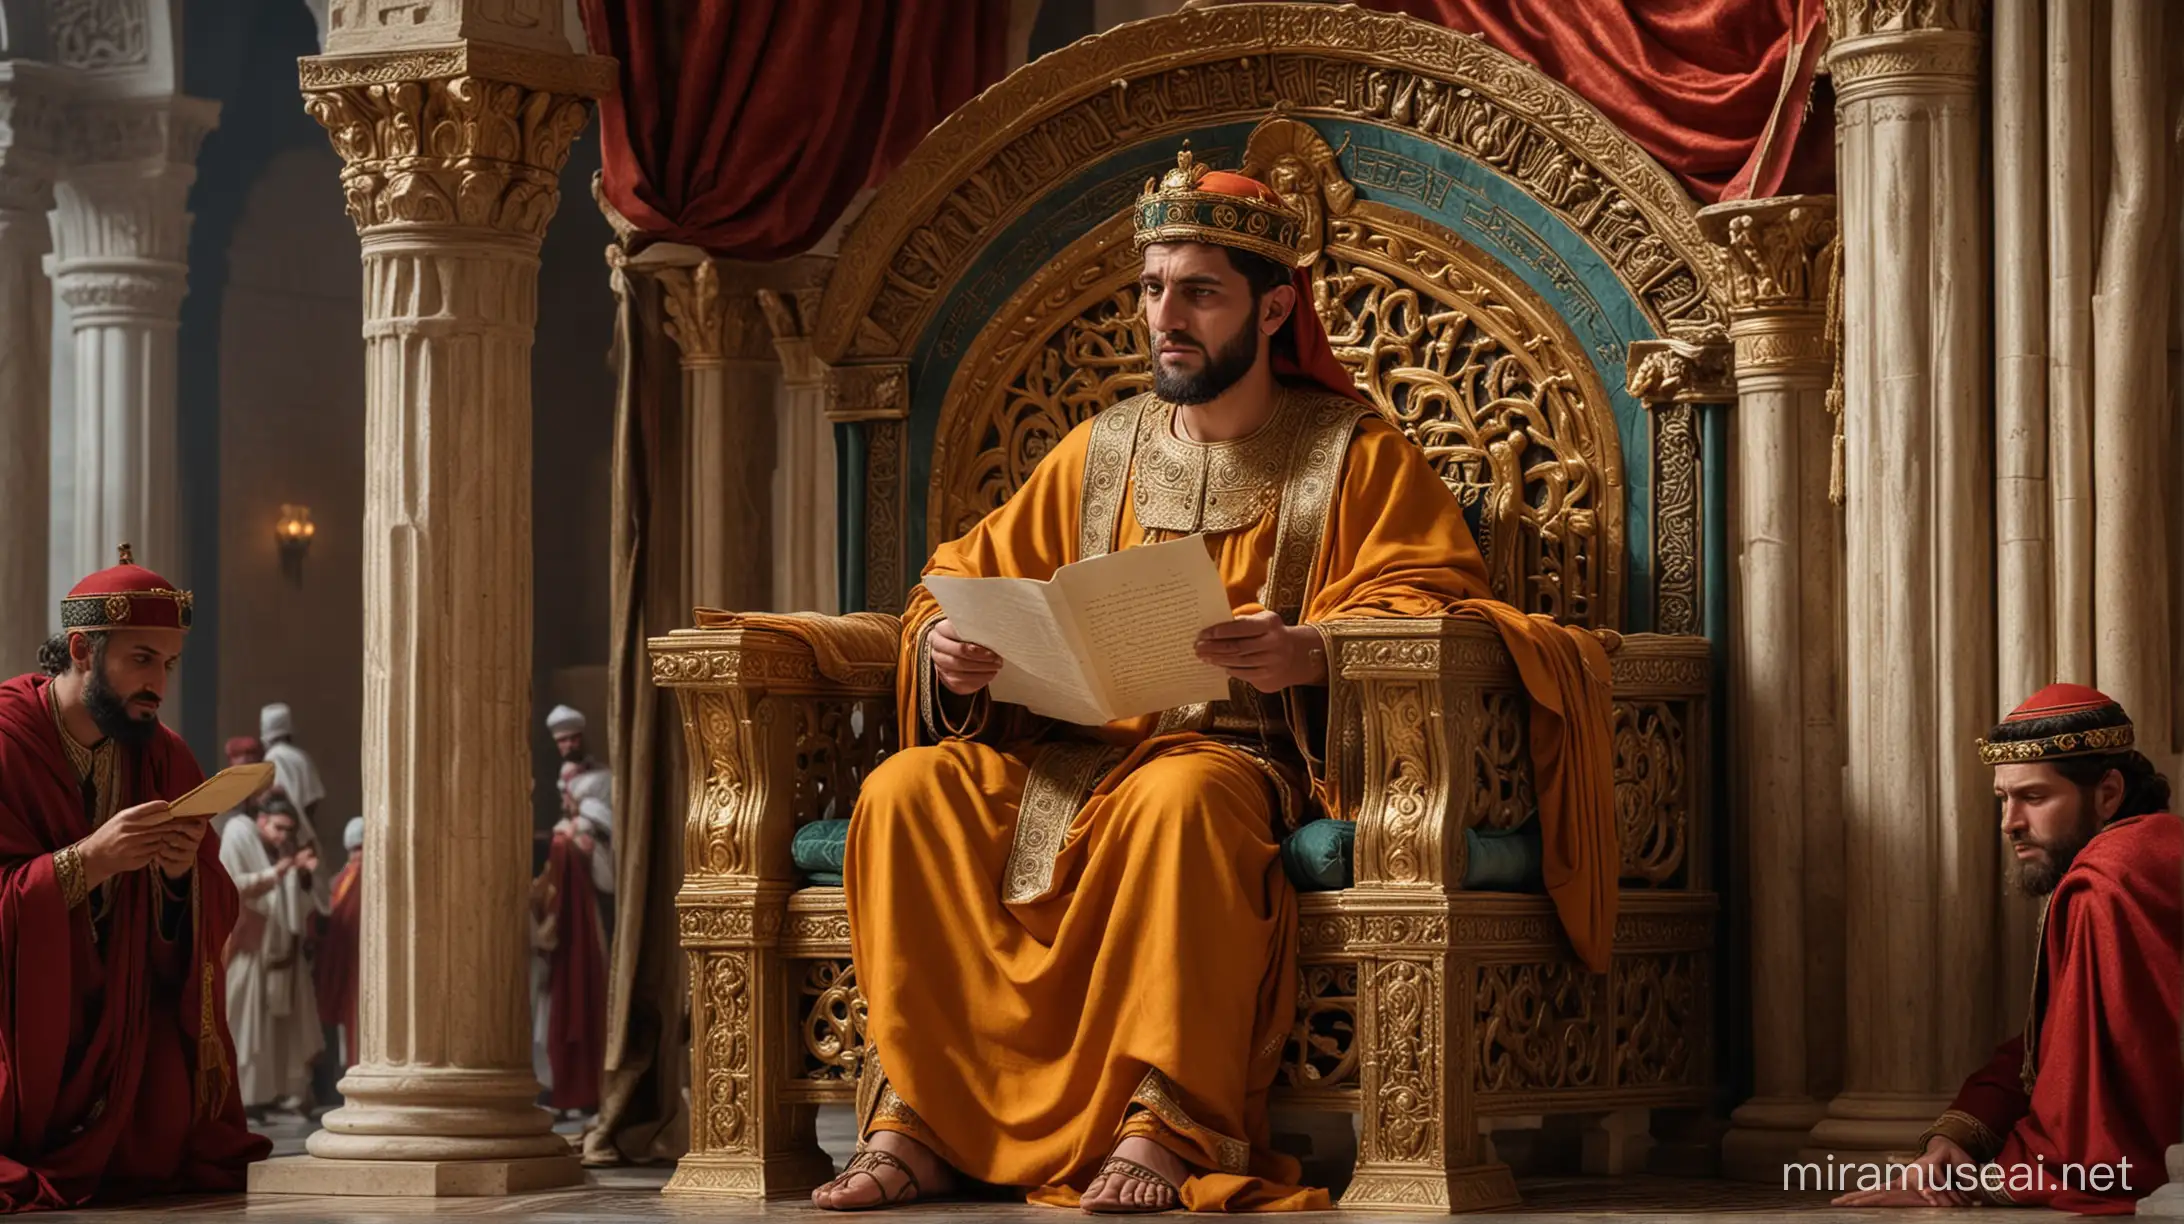 vivid deatils of roman emperor reading letter in  kingdom sitting in throne sent by a muslim delegation of prophet muhammad.